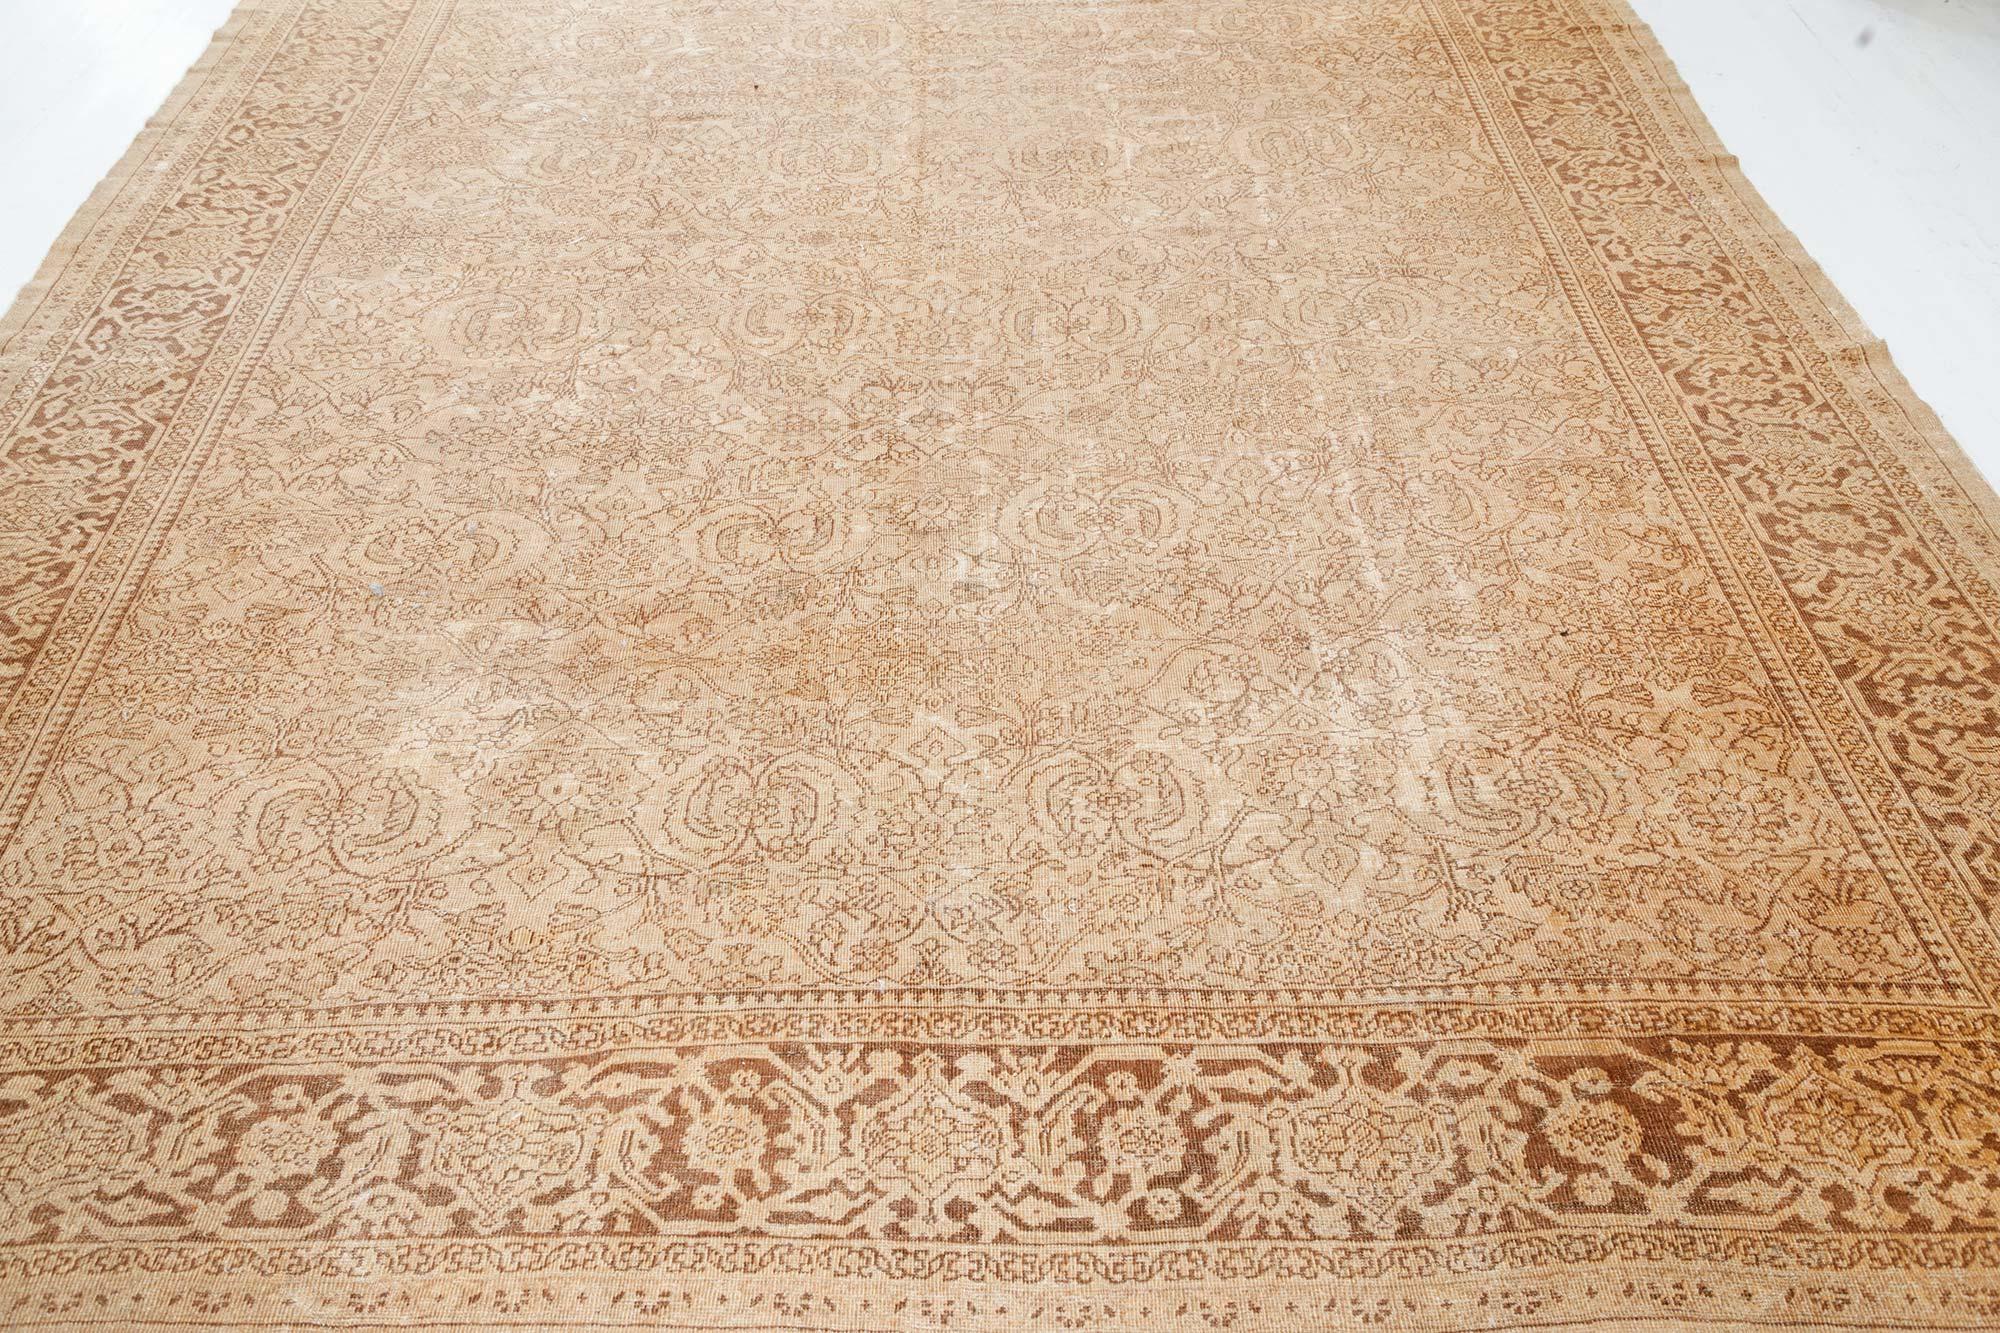 Early 20th Century Persian Sultanabad Botanic Handmade Wool Rug In Good Condition For Sale In New York, NY